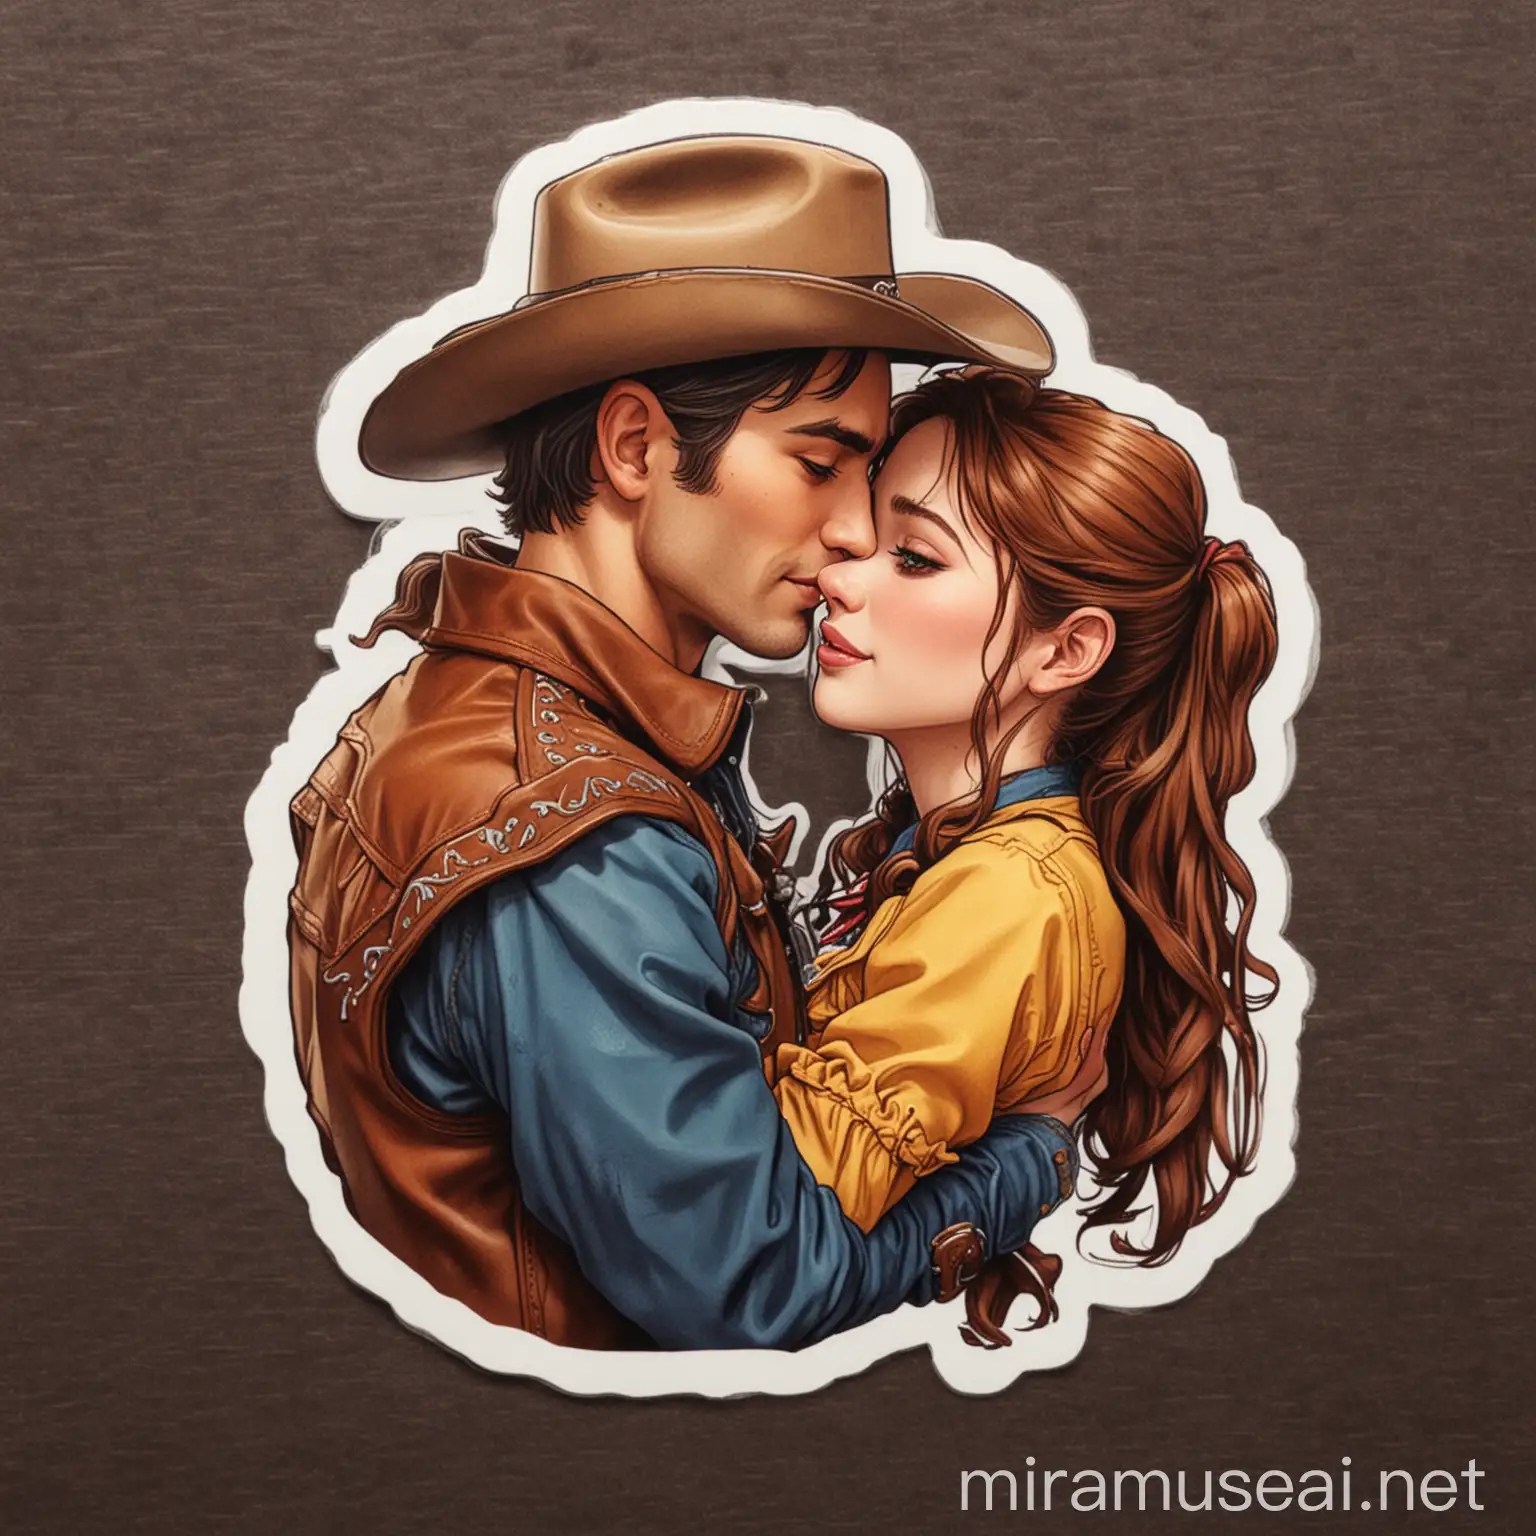 Romantic Cowboy and Cowgirl Illustration Sticker